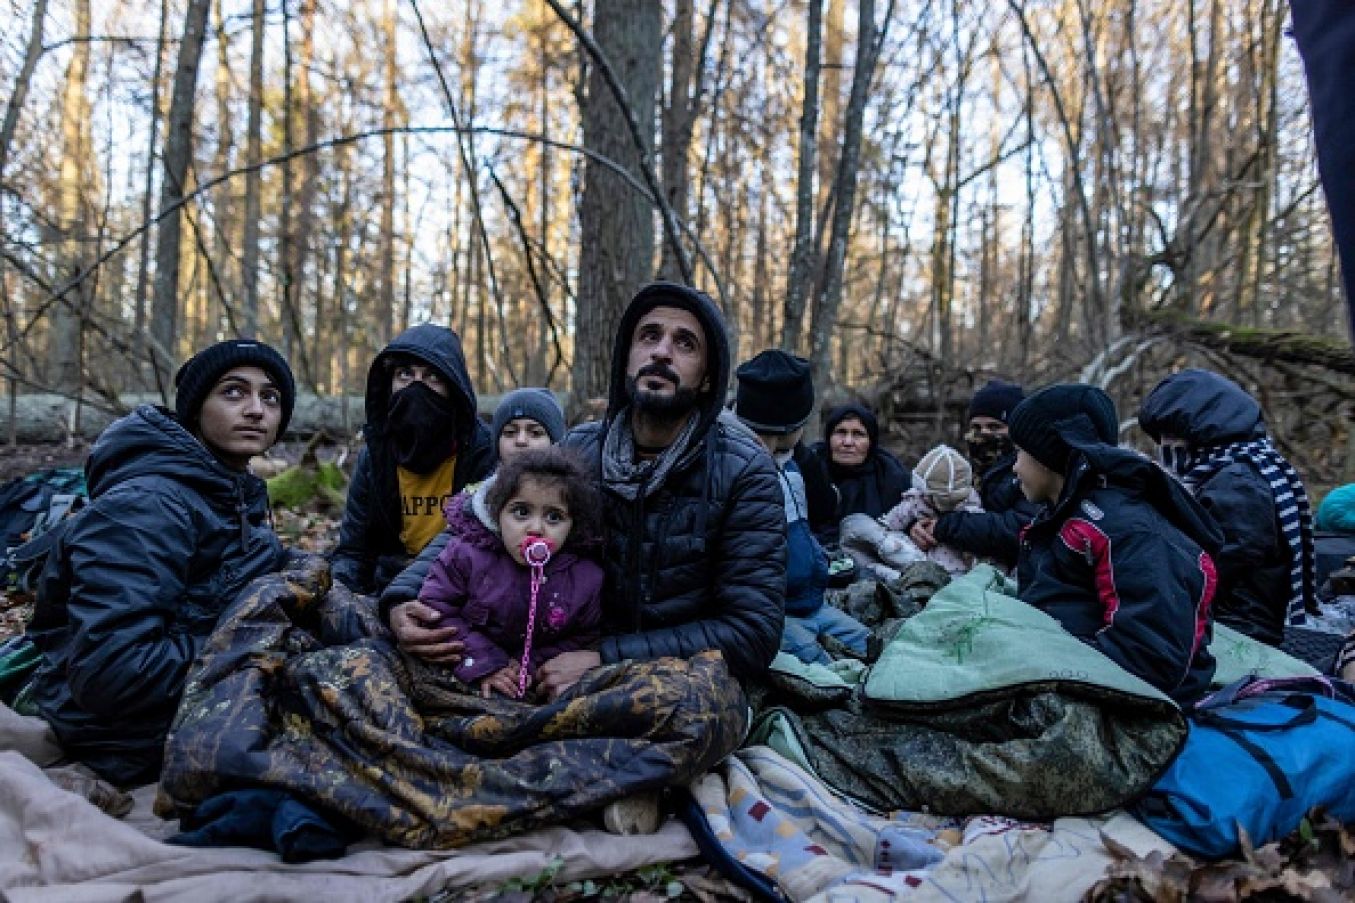 Members Of A Kurdish Family From Dohuk In Iraq In A Forest Near The Polish-Belarus Border. The Three-Generation Family Spent About 20 Days In The Forest And Was Pushed Back To Belarus Eight Times. Photo: Wojtek Radwanski / Afp Via Getty Images